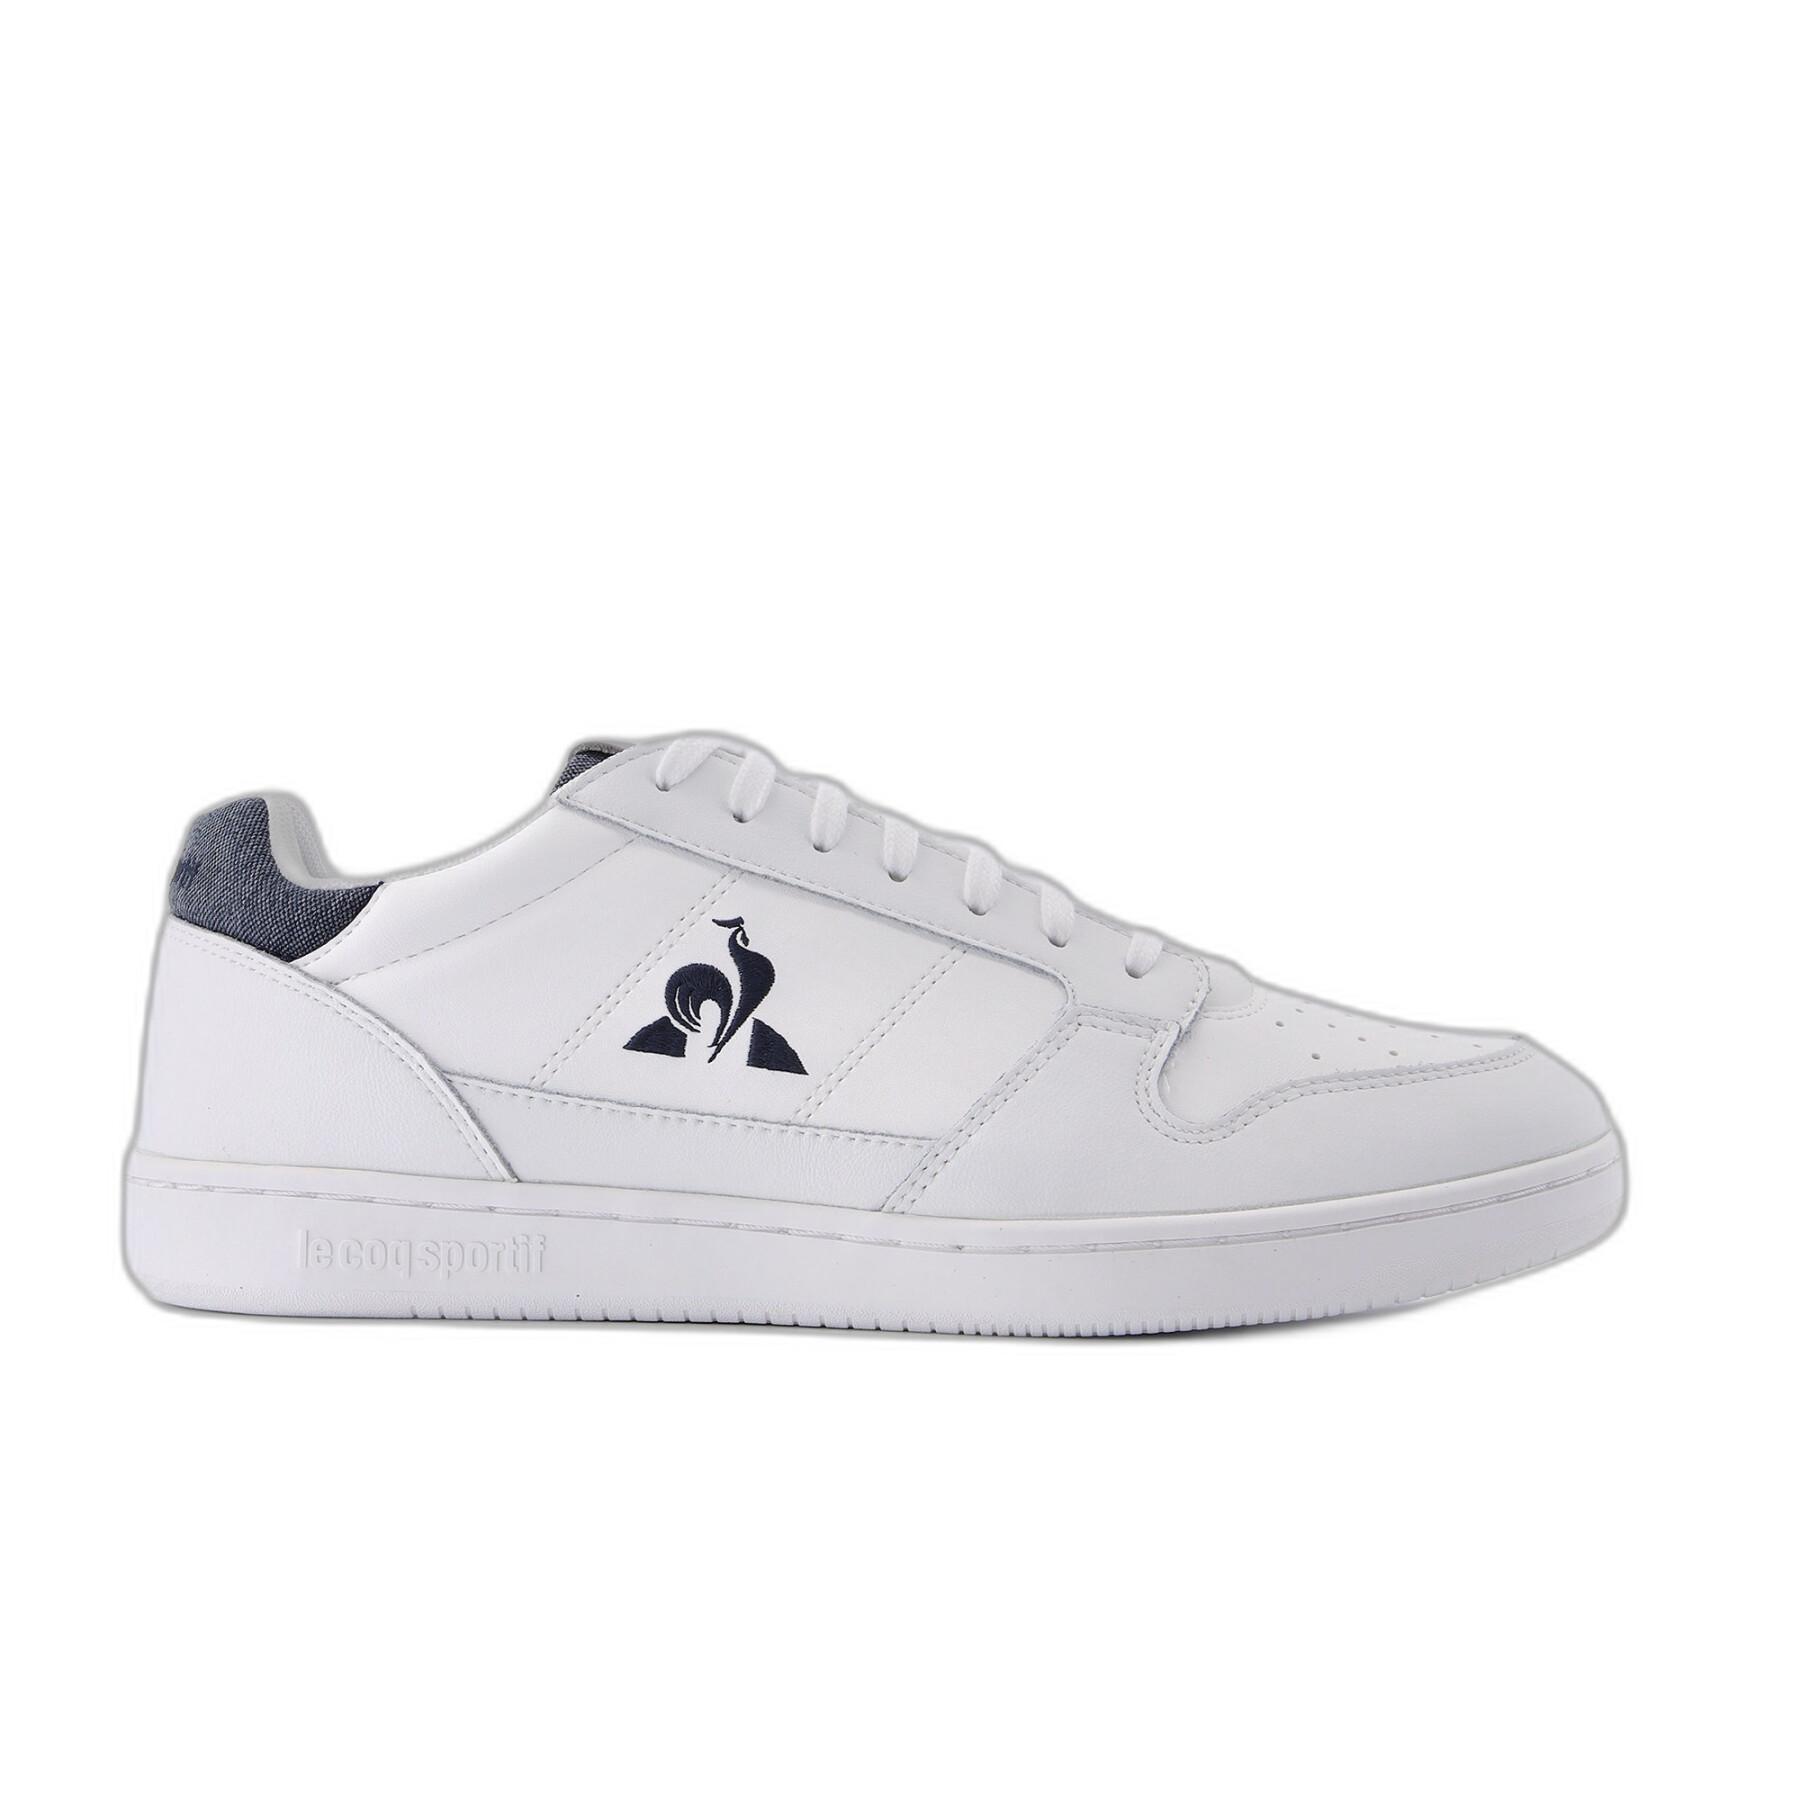 Formadores Le Coq Sportif Breakpoint Craft